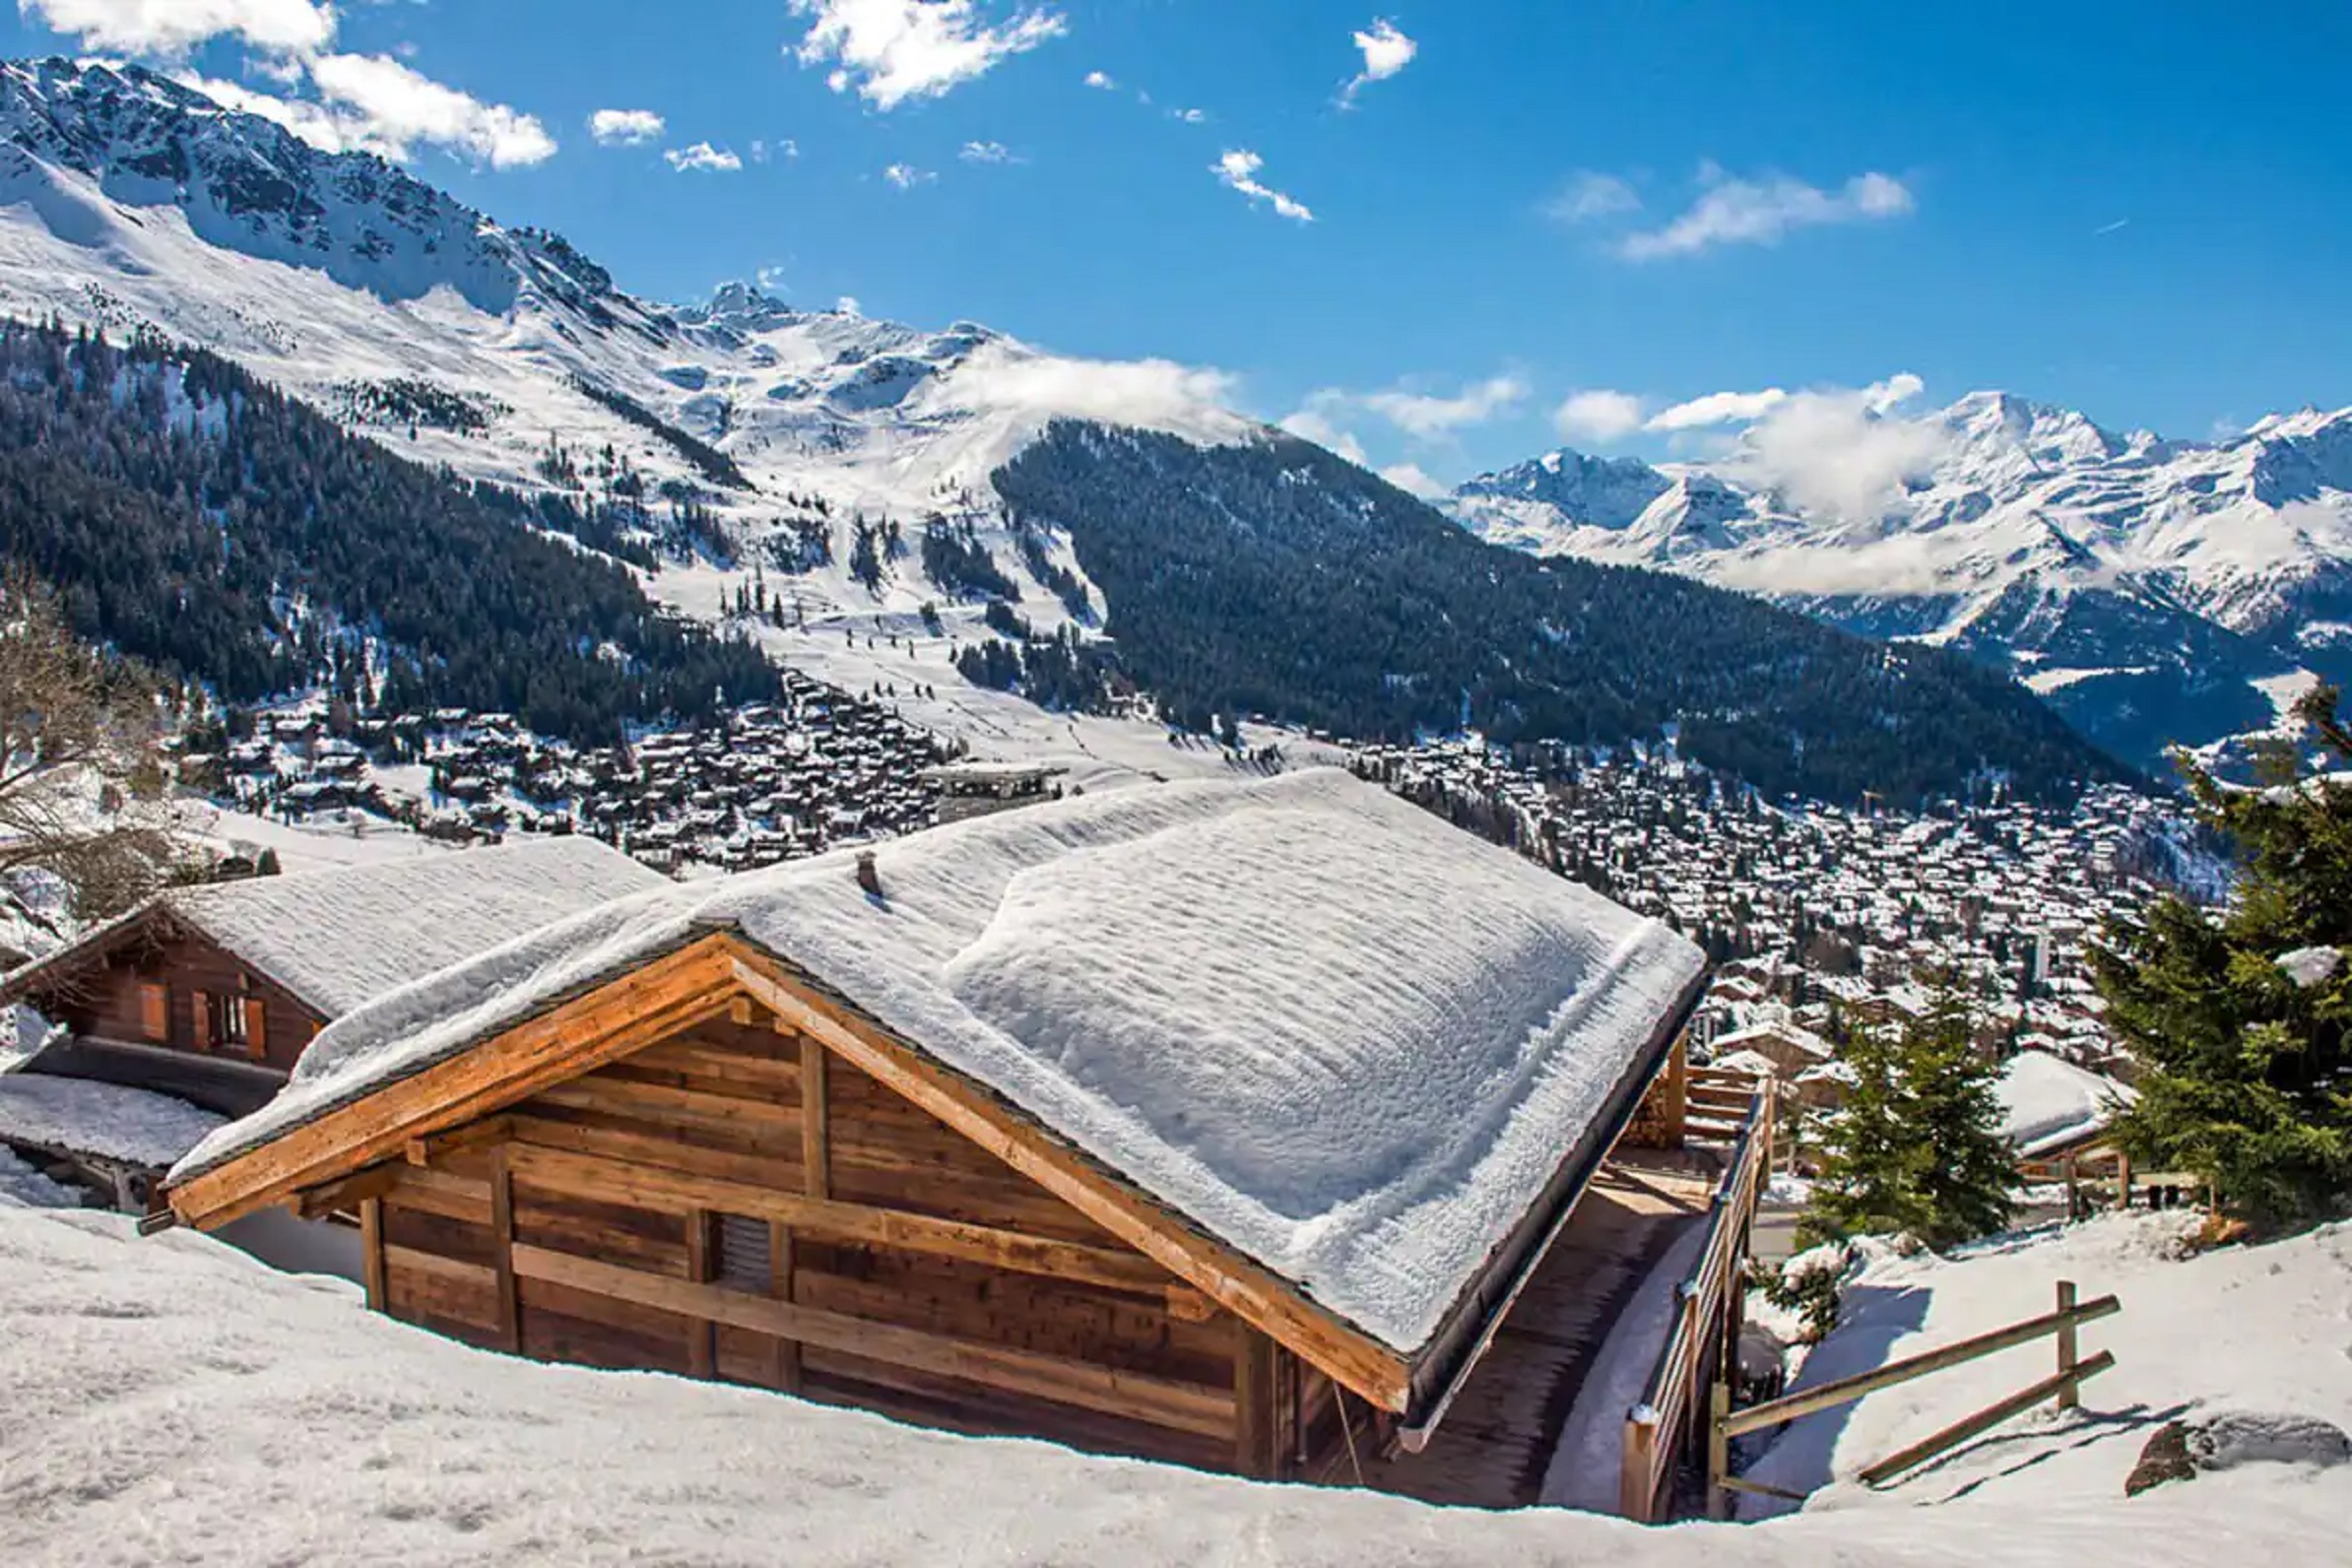 Chalet in the Alps top vacation rental airbnbs with Best Views in the World